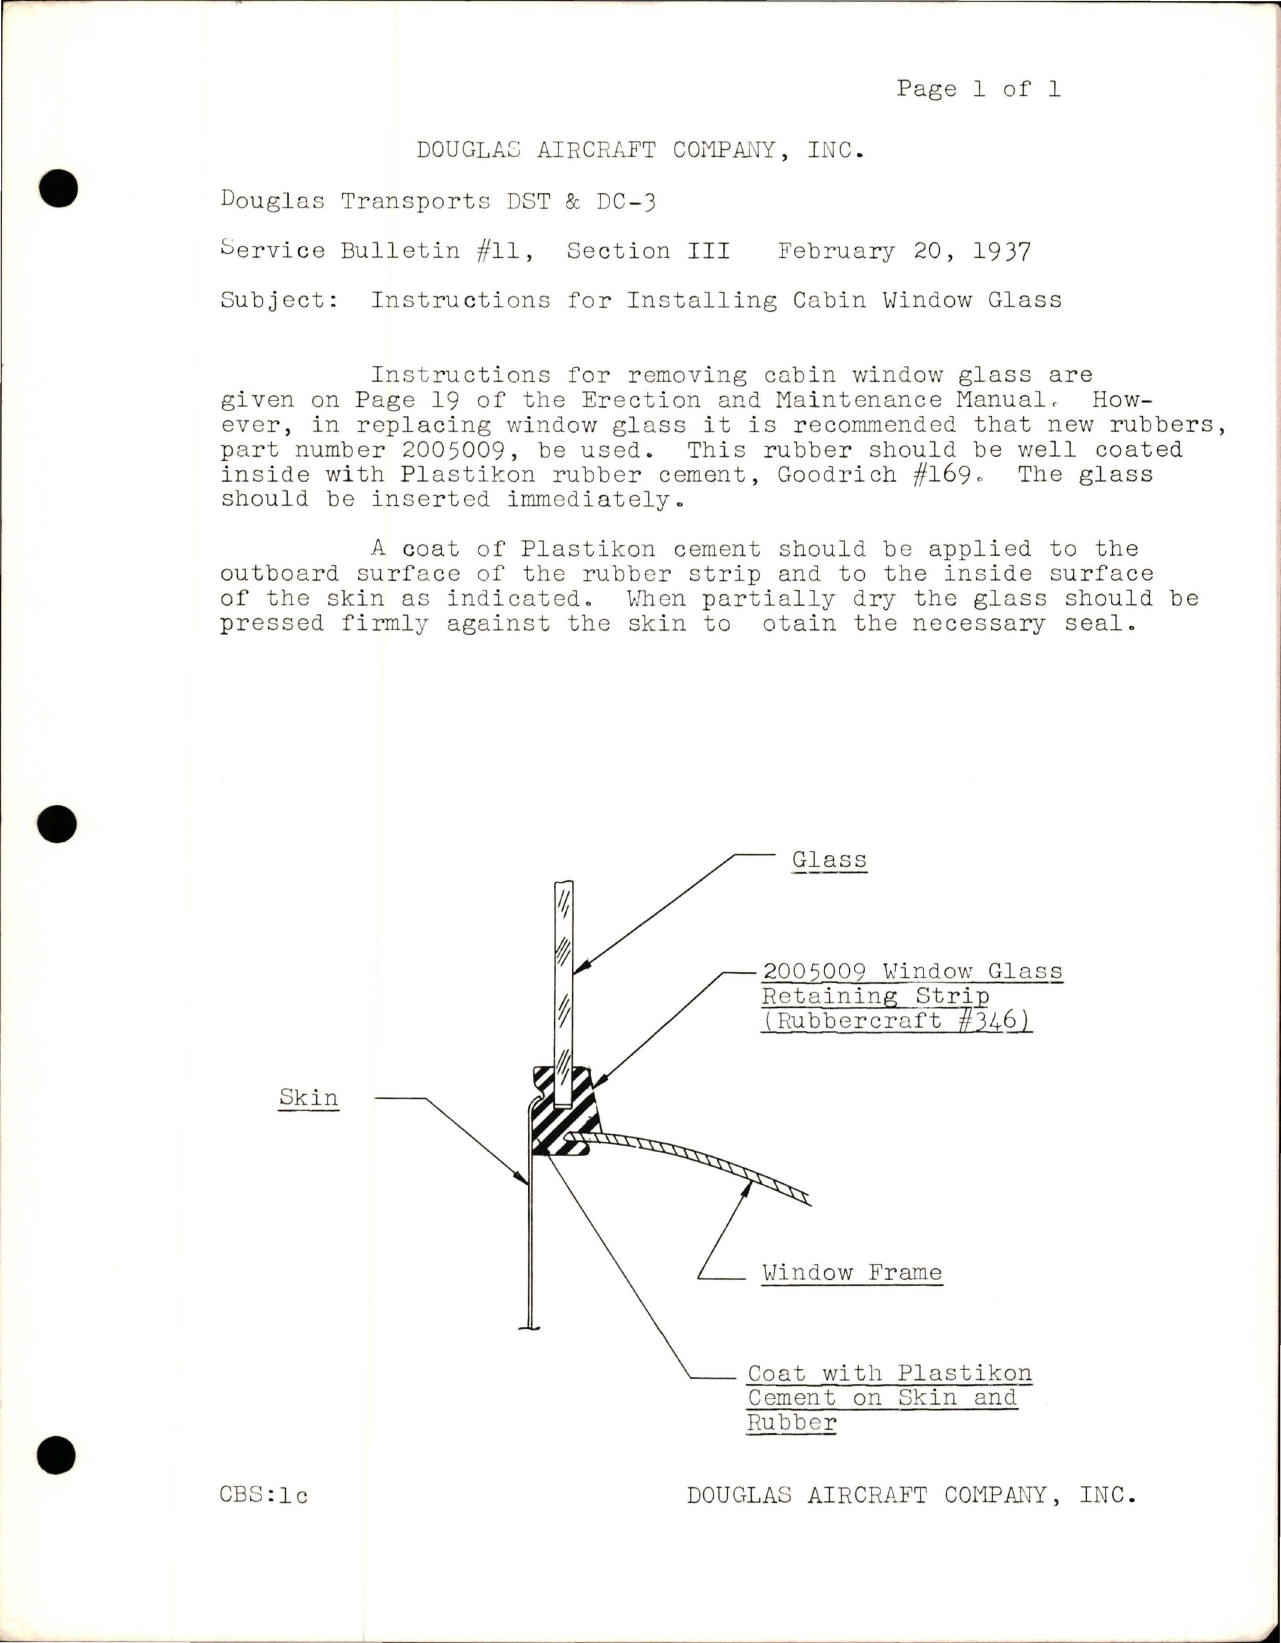 Sample page 1 from AirCorps Library document: Instructions for Installing Cabin Window Glass